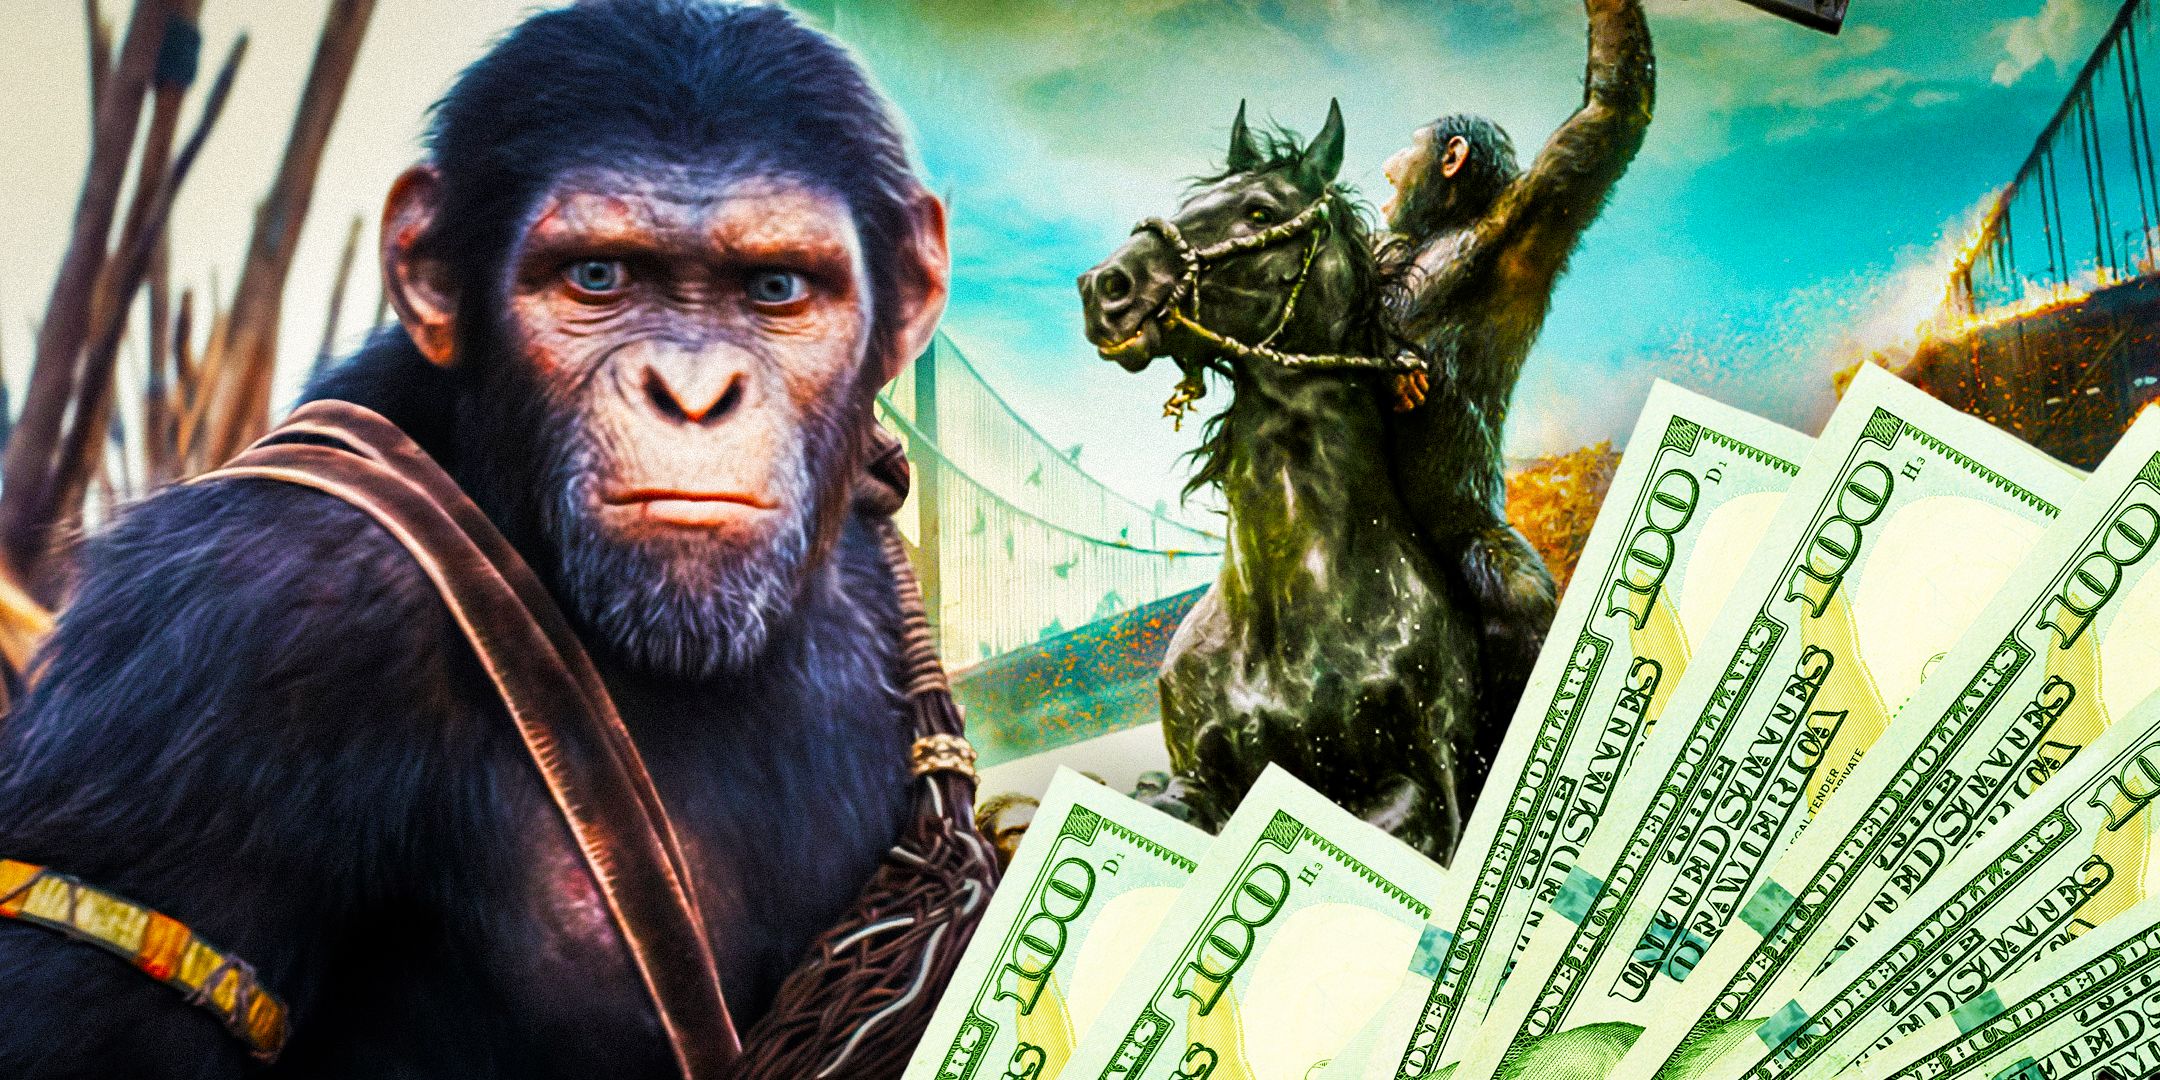 Custom image of Kingdom of the Planet of the Apes and Dawn of the Planet of the Apes